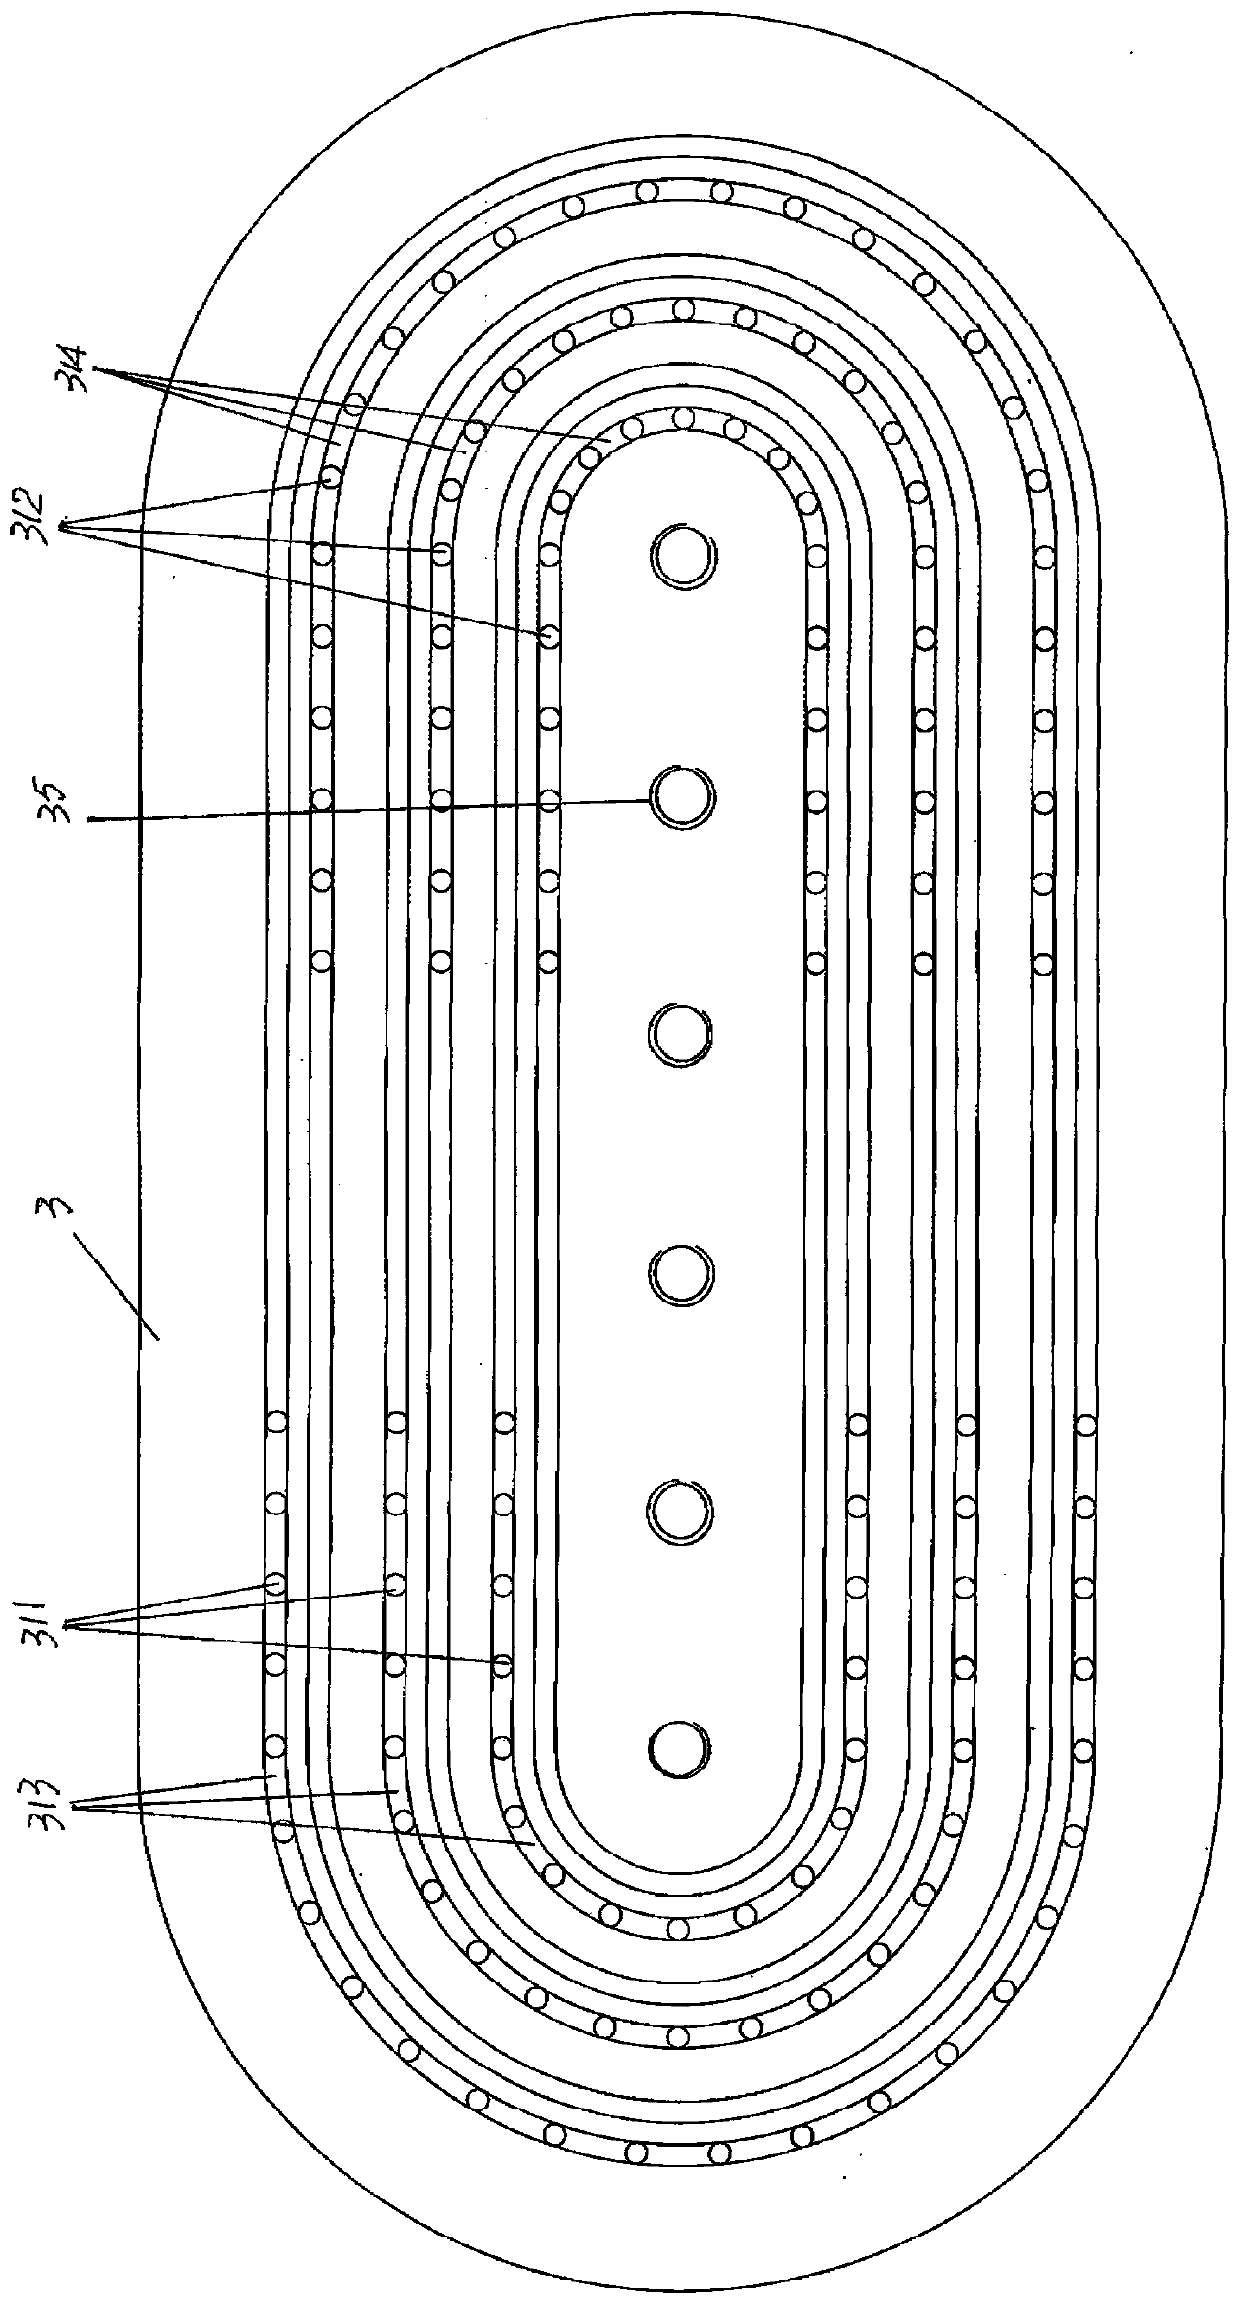 Two-component composite fiber spinning assembly